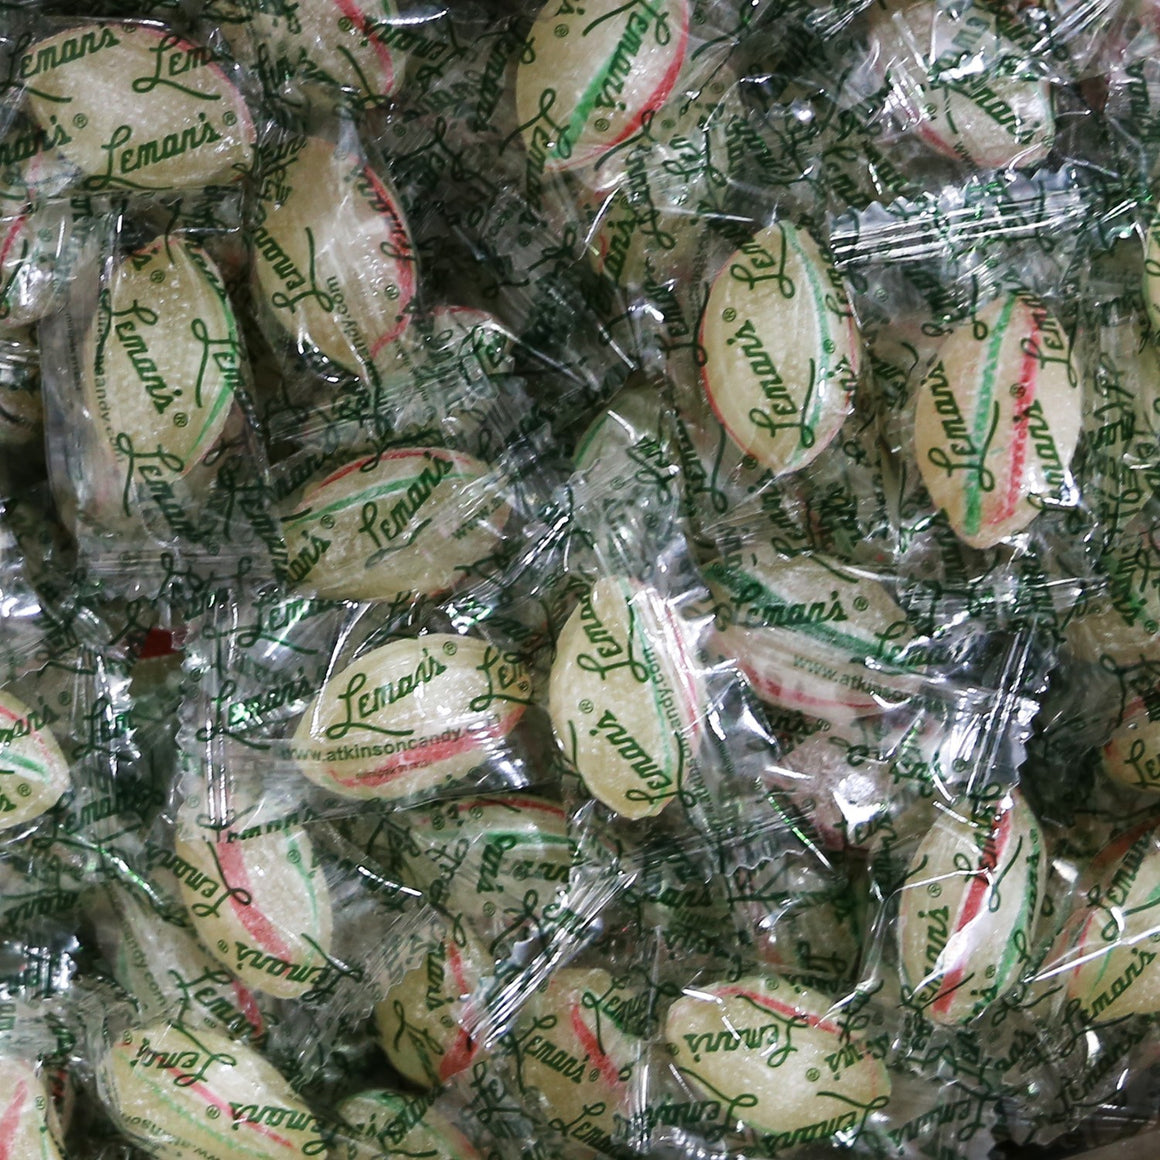 Leman's Mint Hard Candy Bulk Bags. For fresh candy and great service, visit www.allcitycandy.com